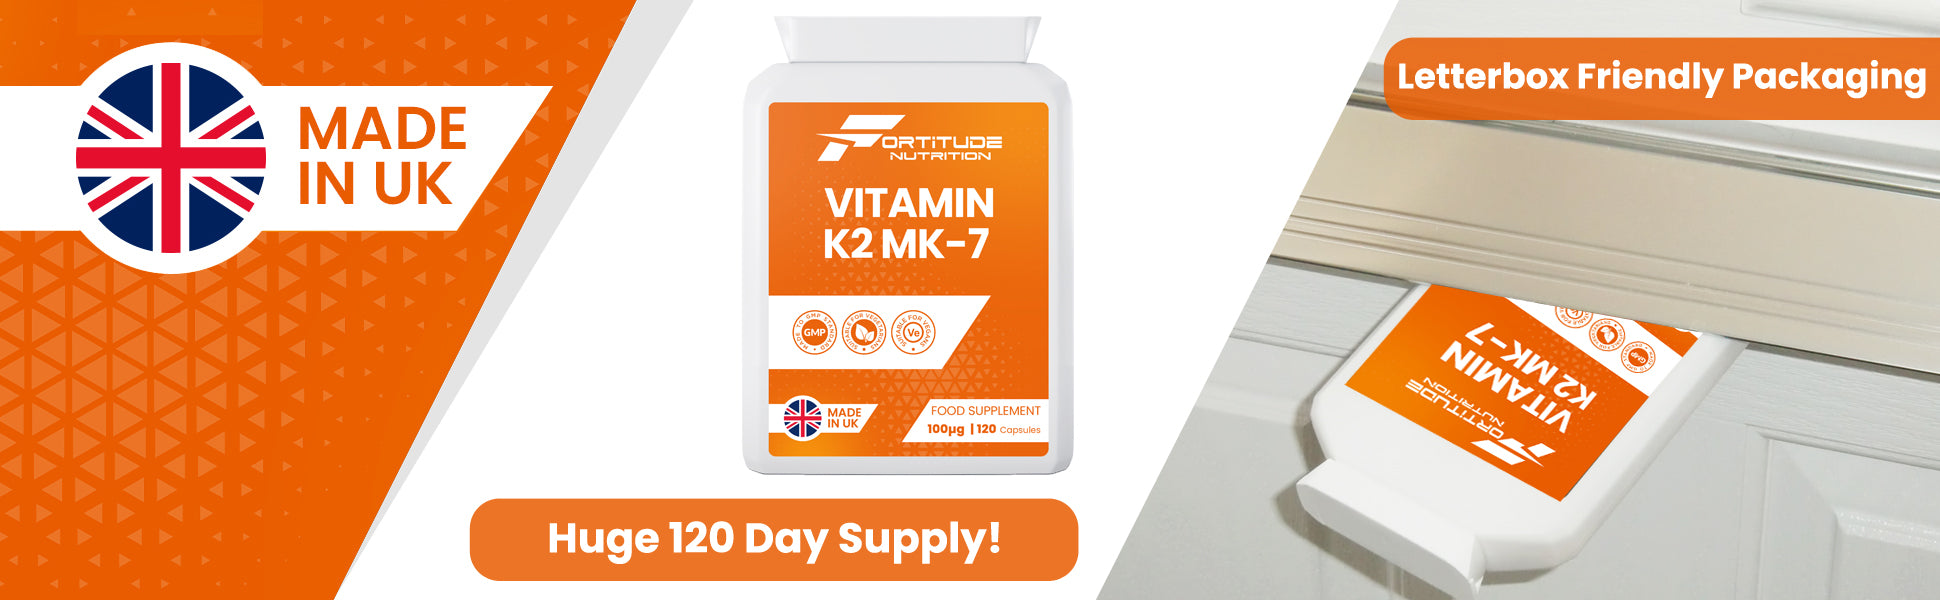 Vitamin K2 Supplements in Letterbox Friendly Packaging